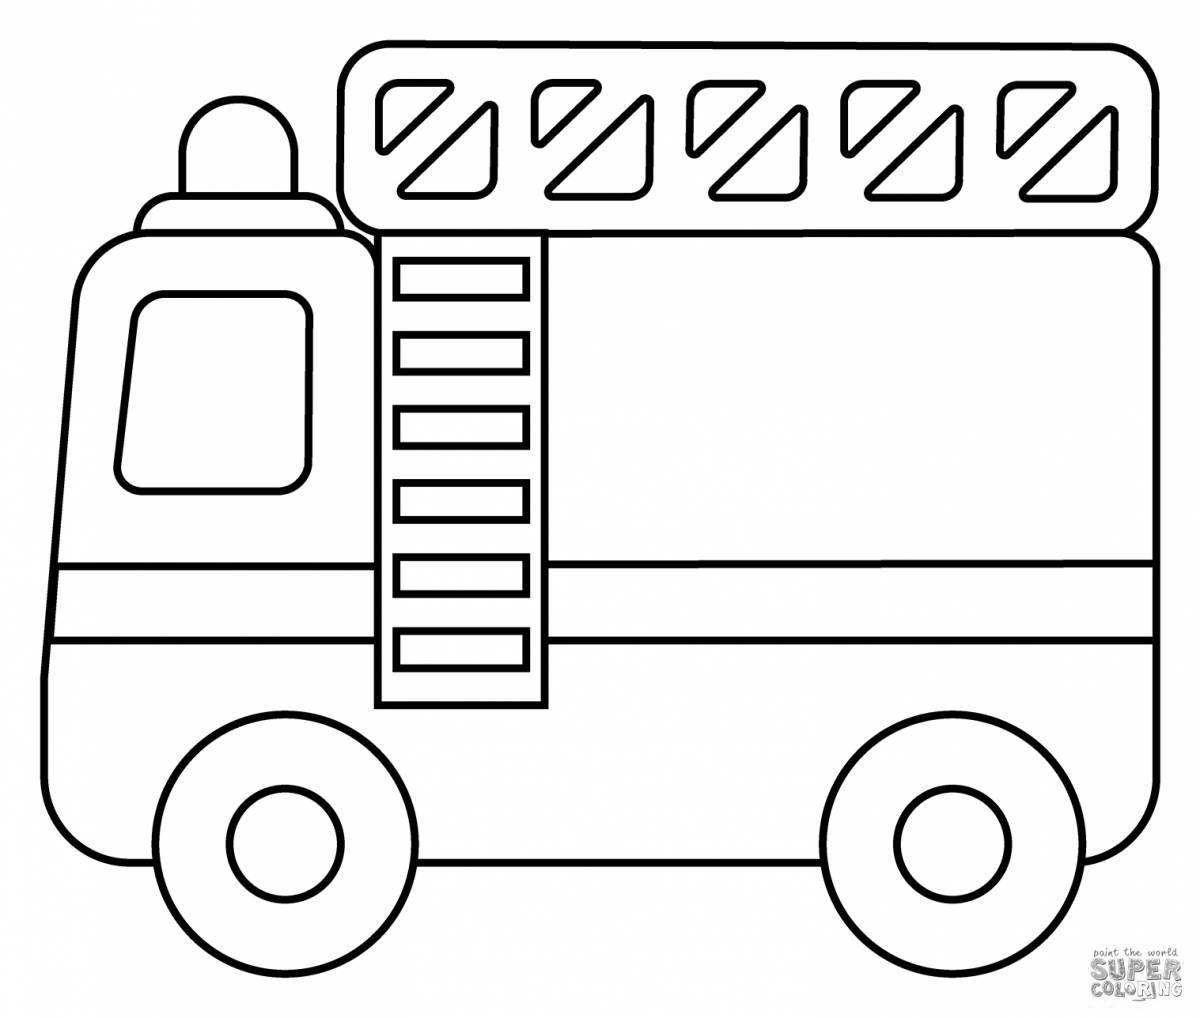 Finley fairy fire truck coloring book